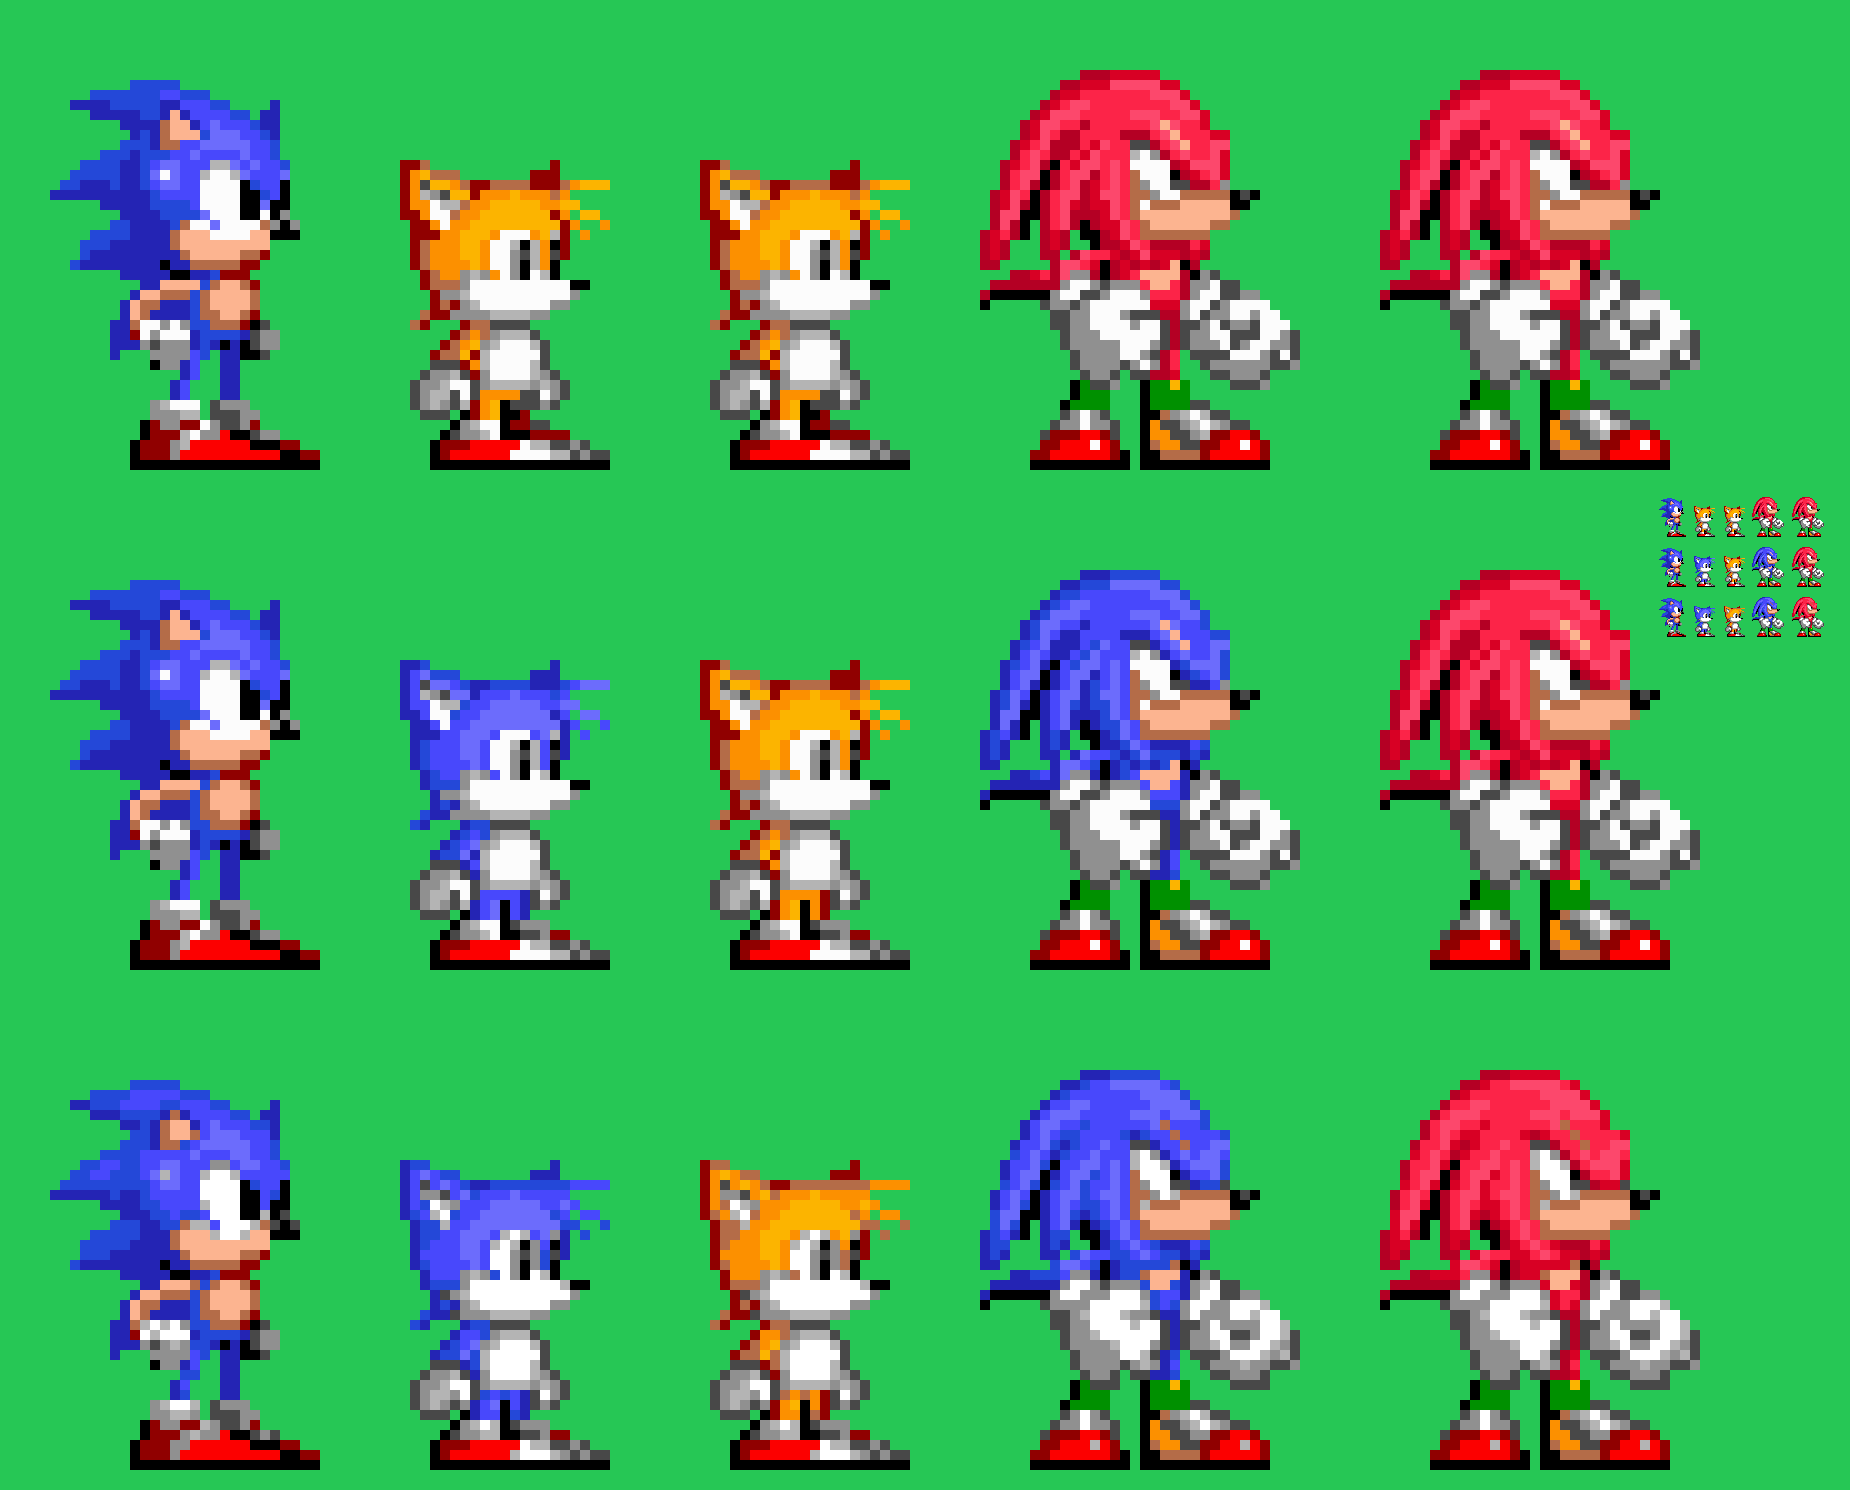 Download Sonic 2 Sprite With Mania Shading - Sonic The Hedgehog